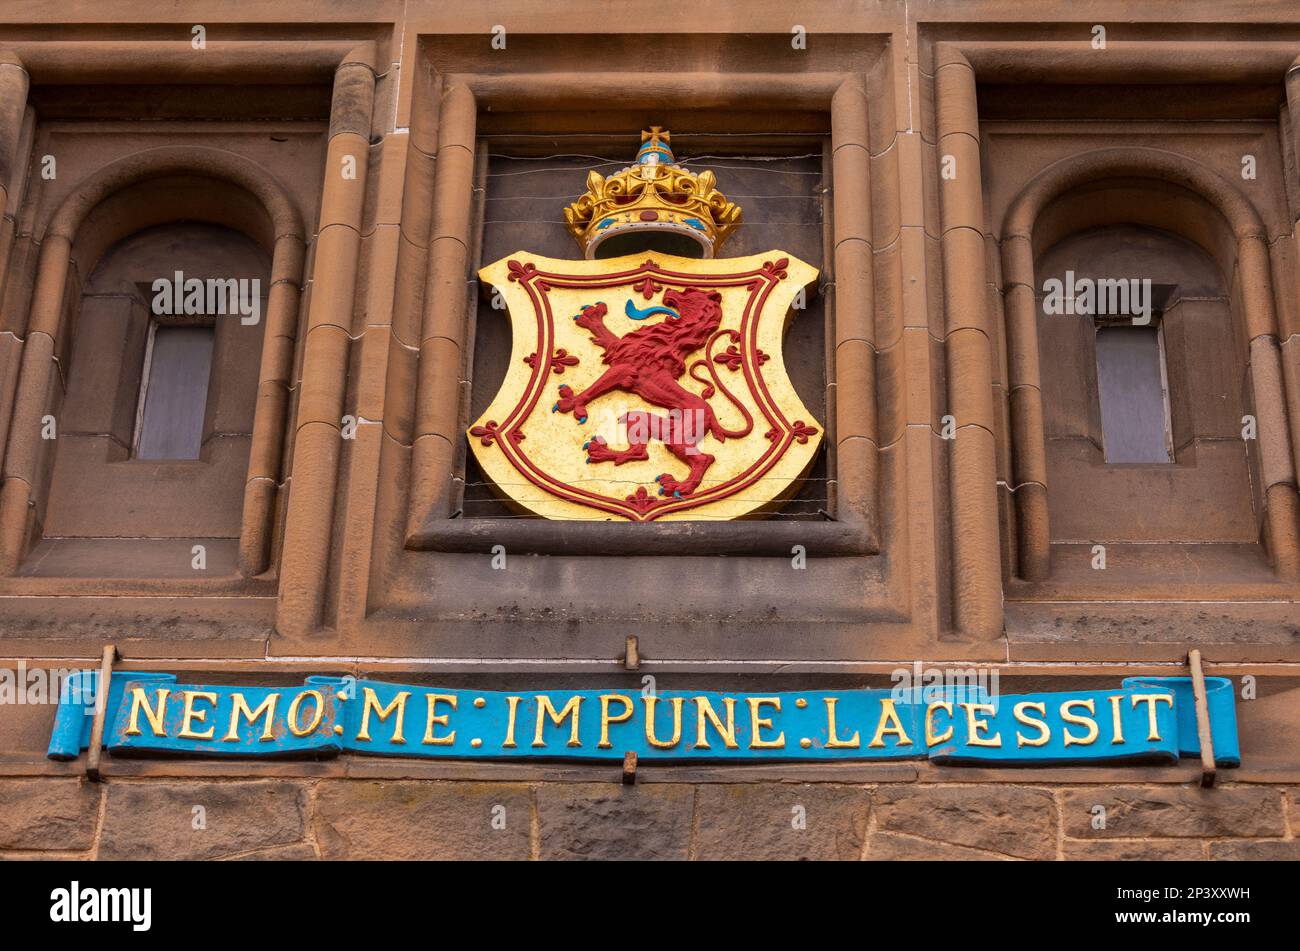 EDINBURGH, SCOTLAND, EUROPE - Royal Coat of Arms at entrance to Edinburgh Castle. Includes The Lion Rampant and the royal crown of Scotland. Stock Photo